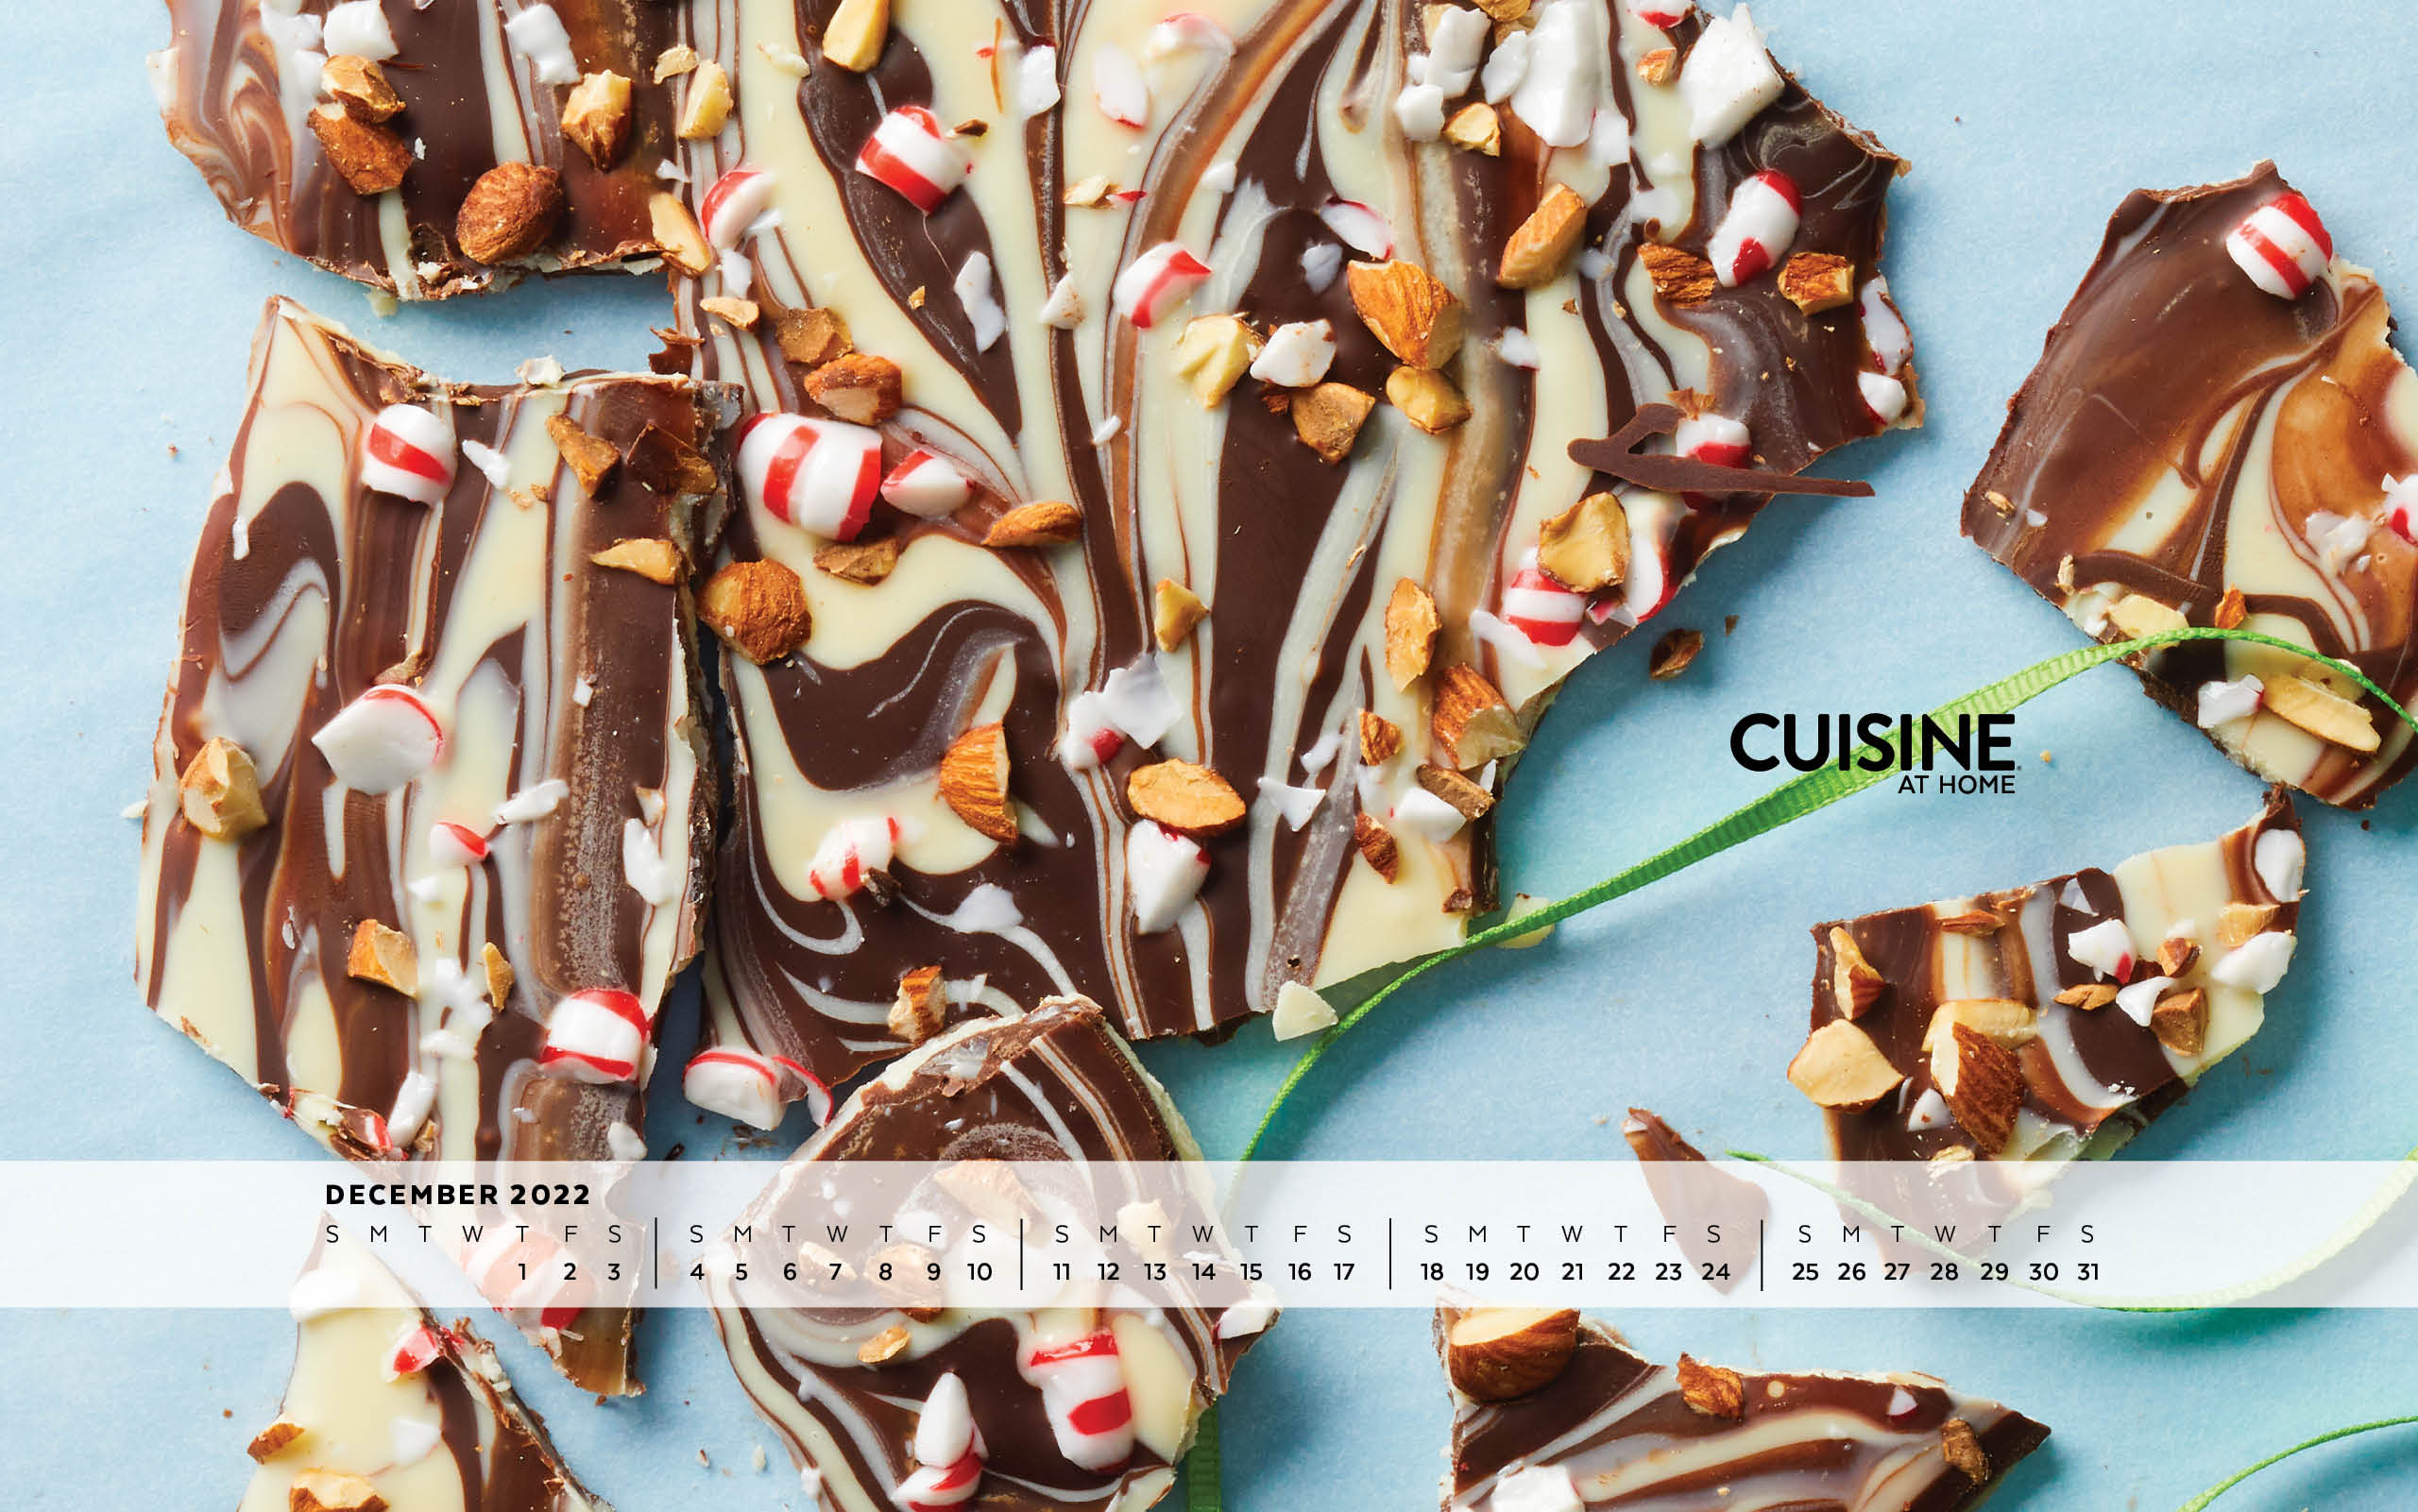 Free Desktop Wallpaper with calendar Windows Mac - November 2022 - Cuisine at Home - Winter aesthetic cozy comfort food cooking homemade holiday Christmas cookies candy marbled chocolate bark peppermint hygge